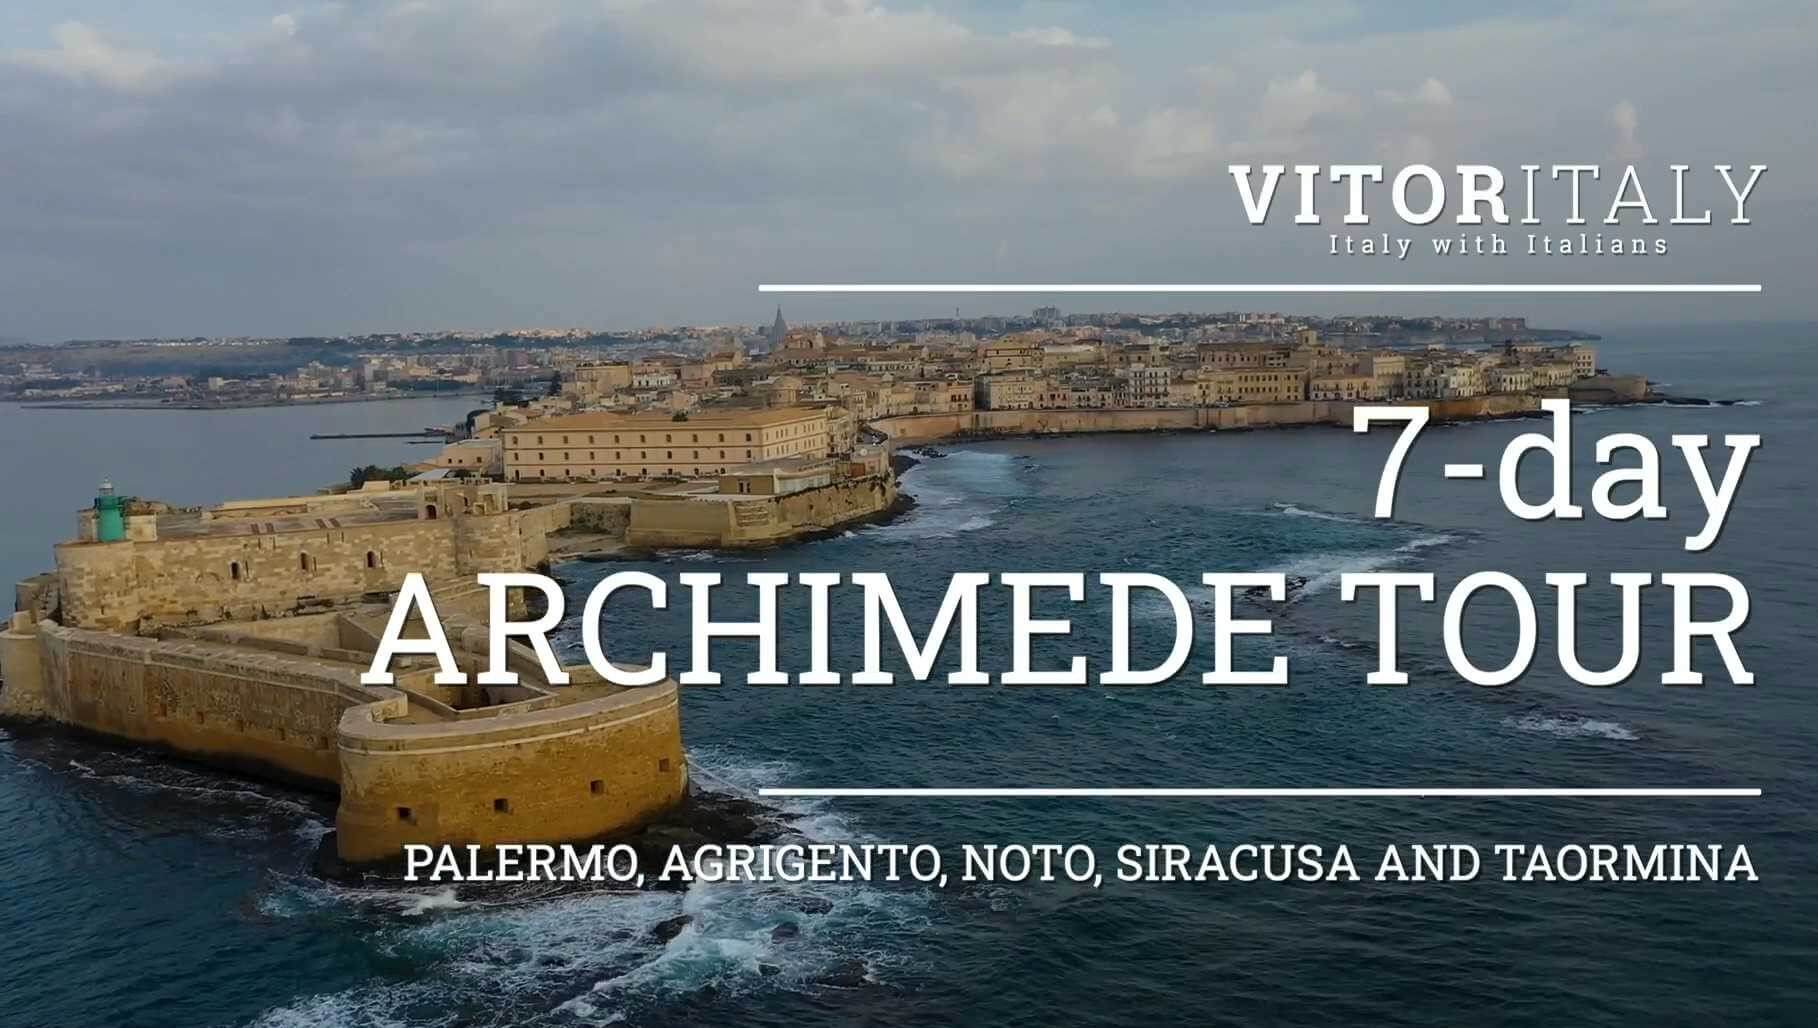 ARCHIMEDE PRIVATE TOUR - Palermo, Agrigento, Noto, Siracusa and Taormina